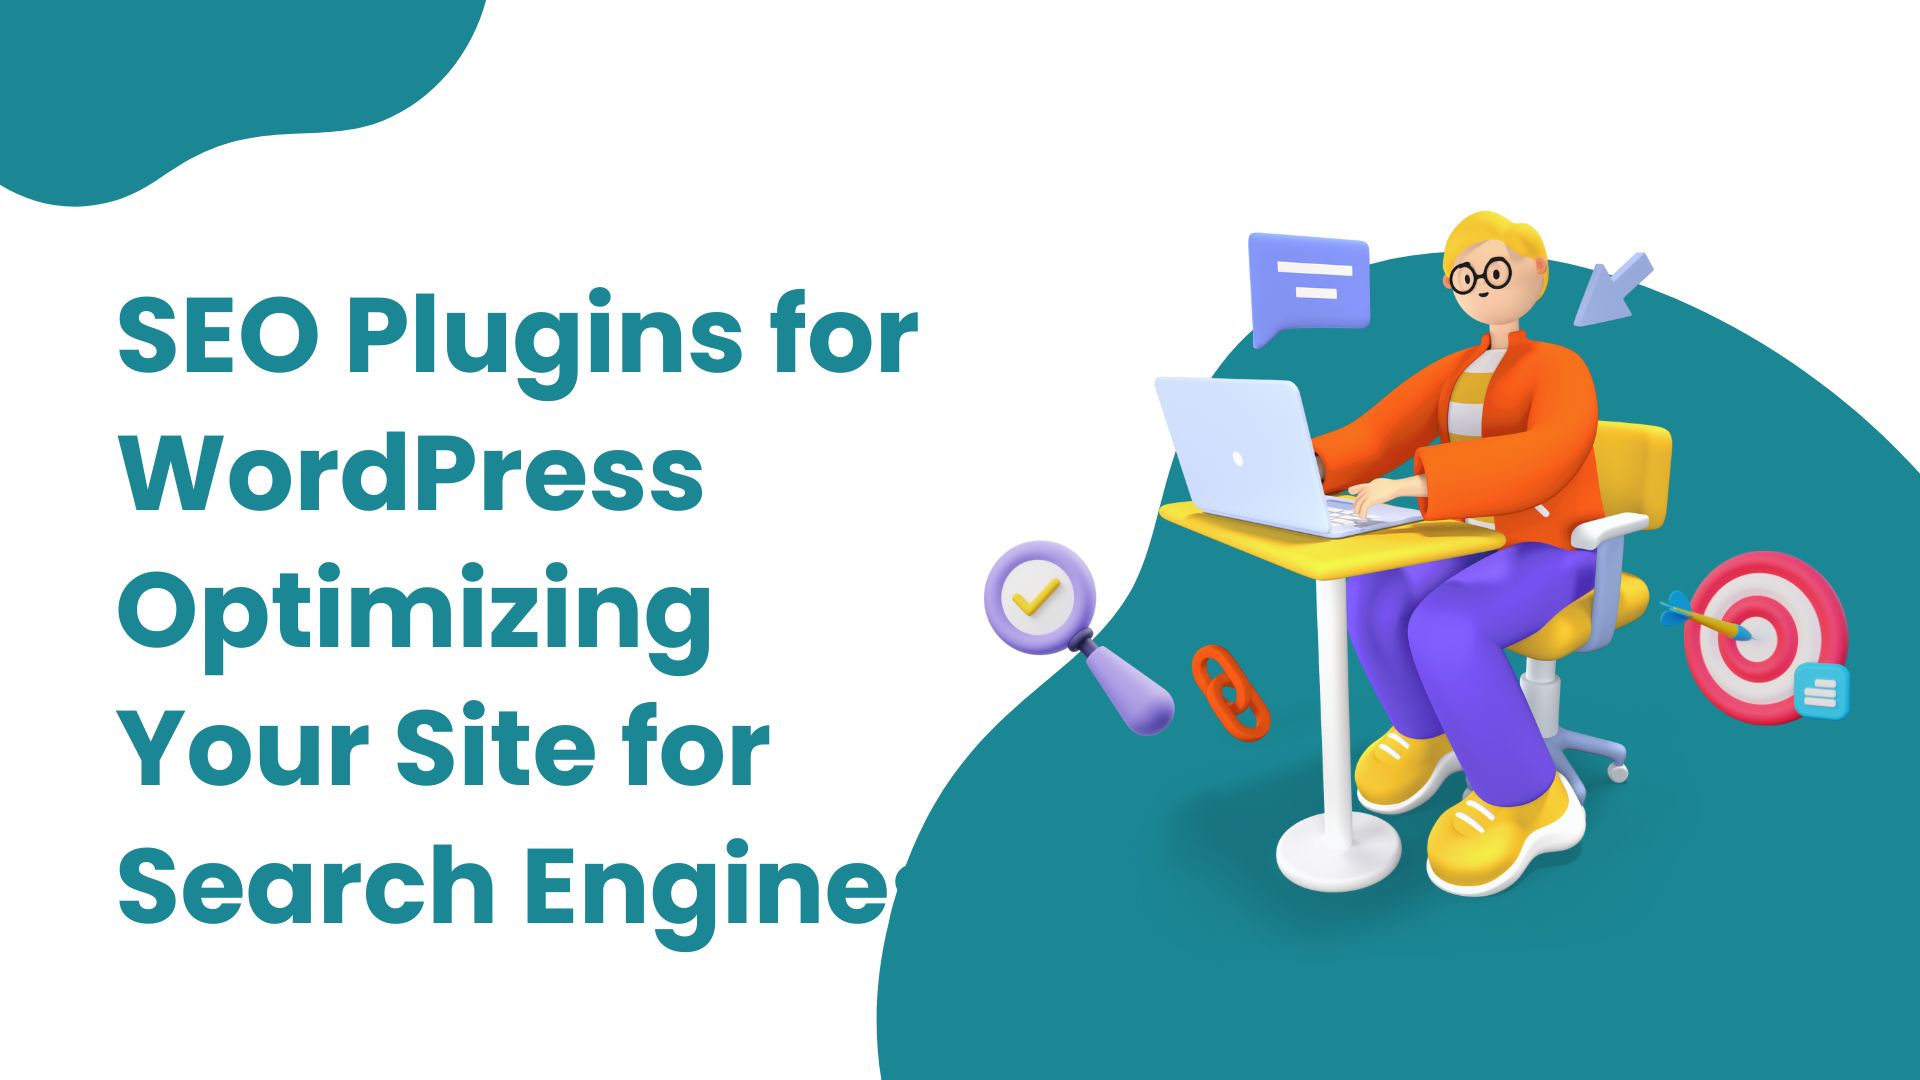 SEO Plugins for WordPress - Optimizing Your Site for Search Engines